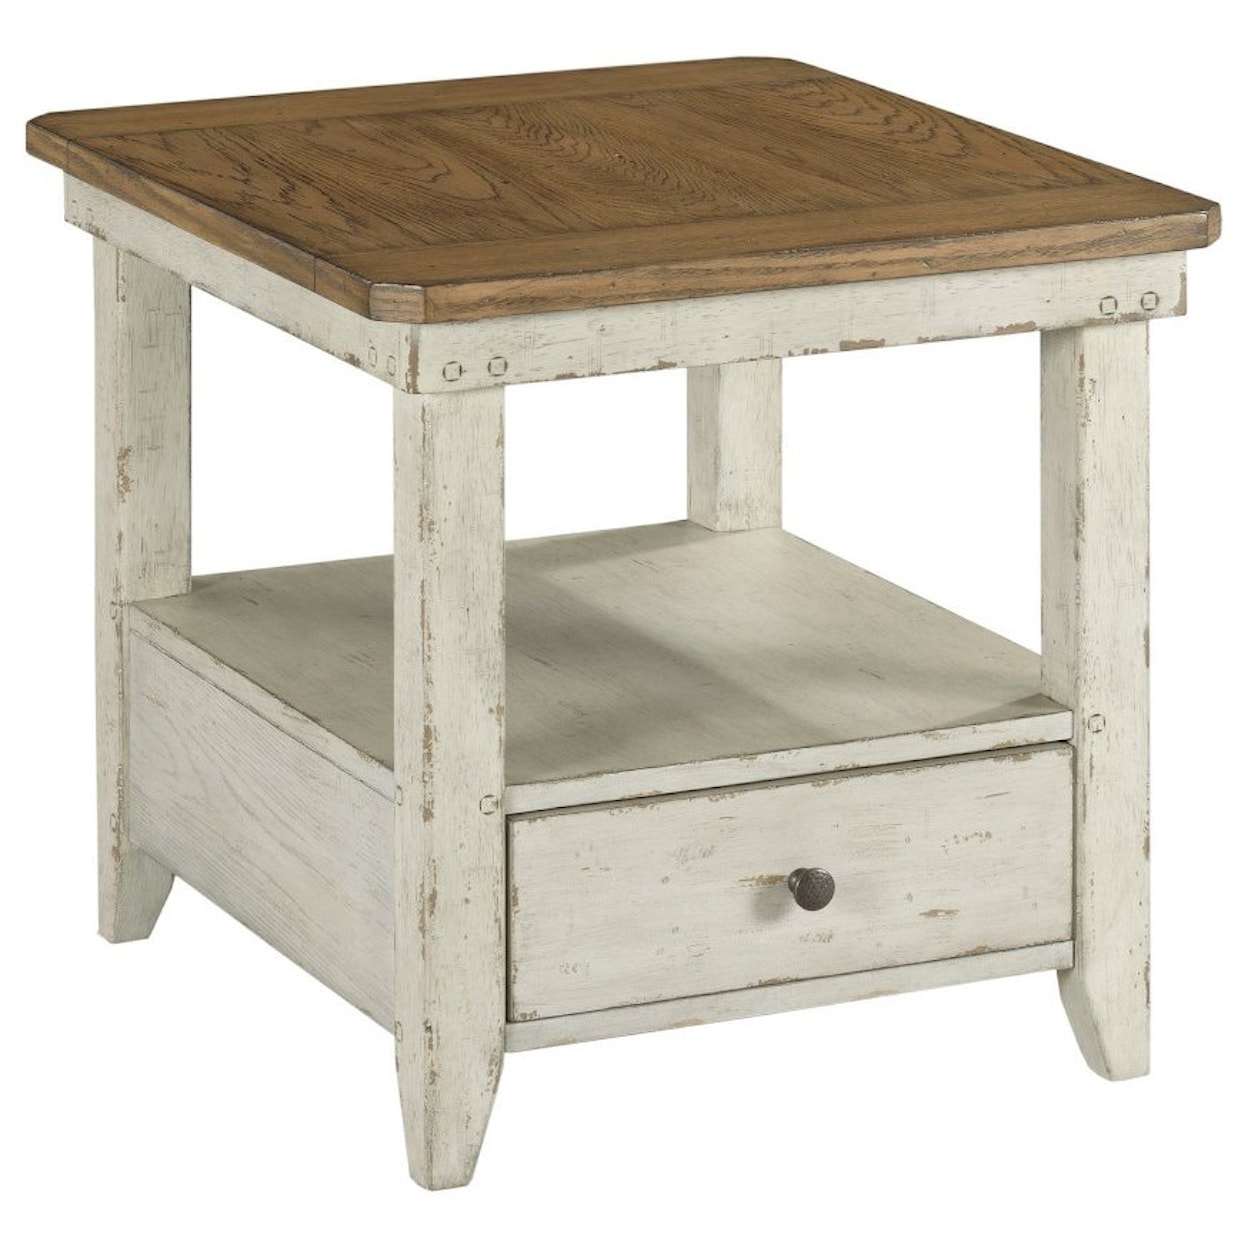 Hammary Chambers Rectangular Drawer End Table